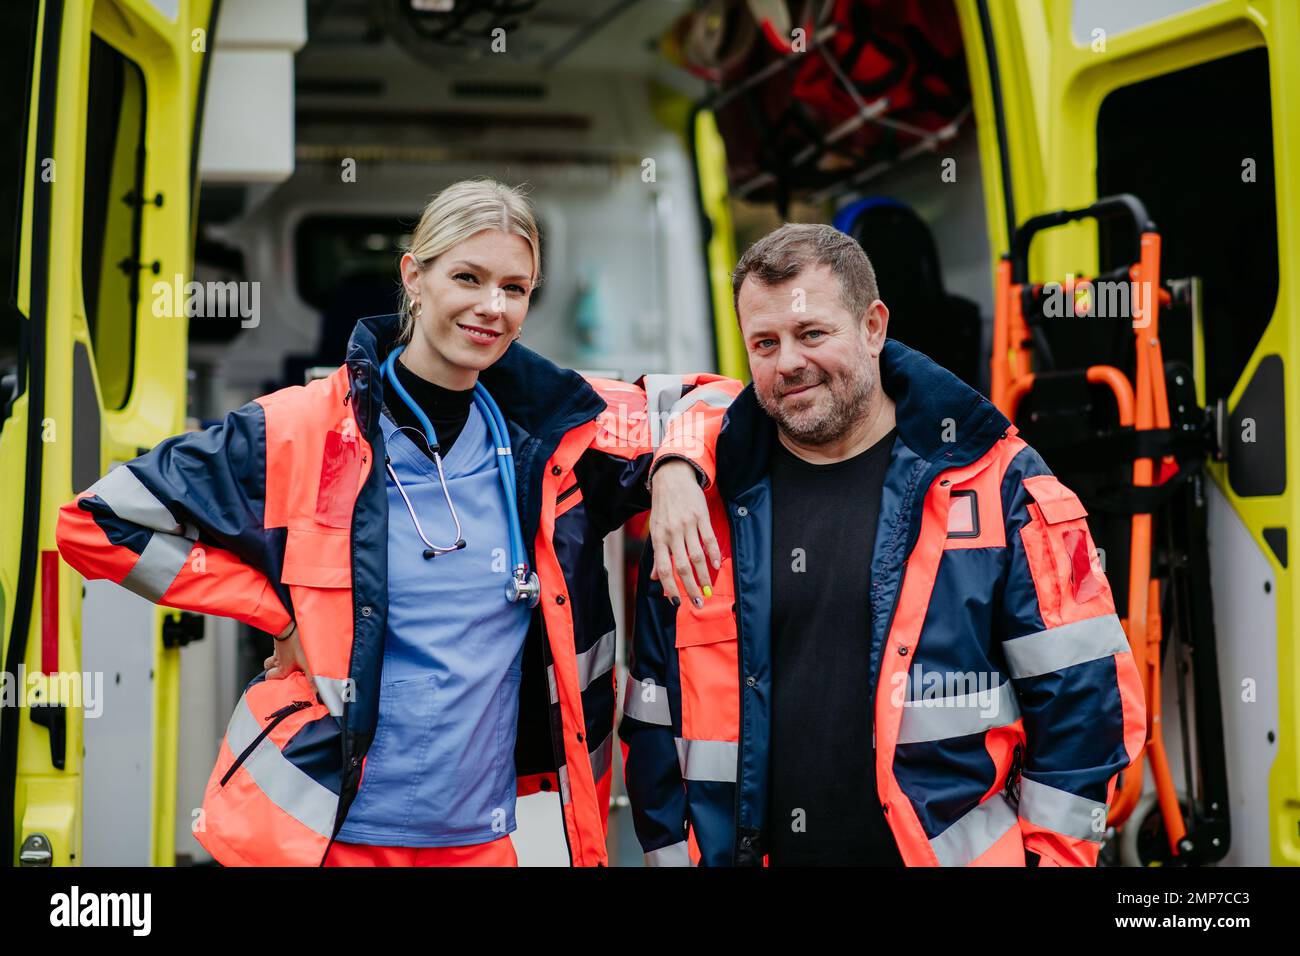 Portrait of rescuers in front of ambulance car. Stock Photo